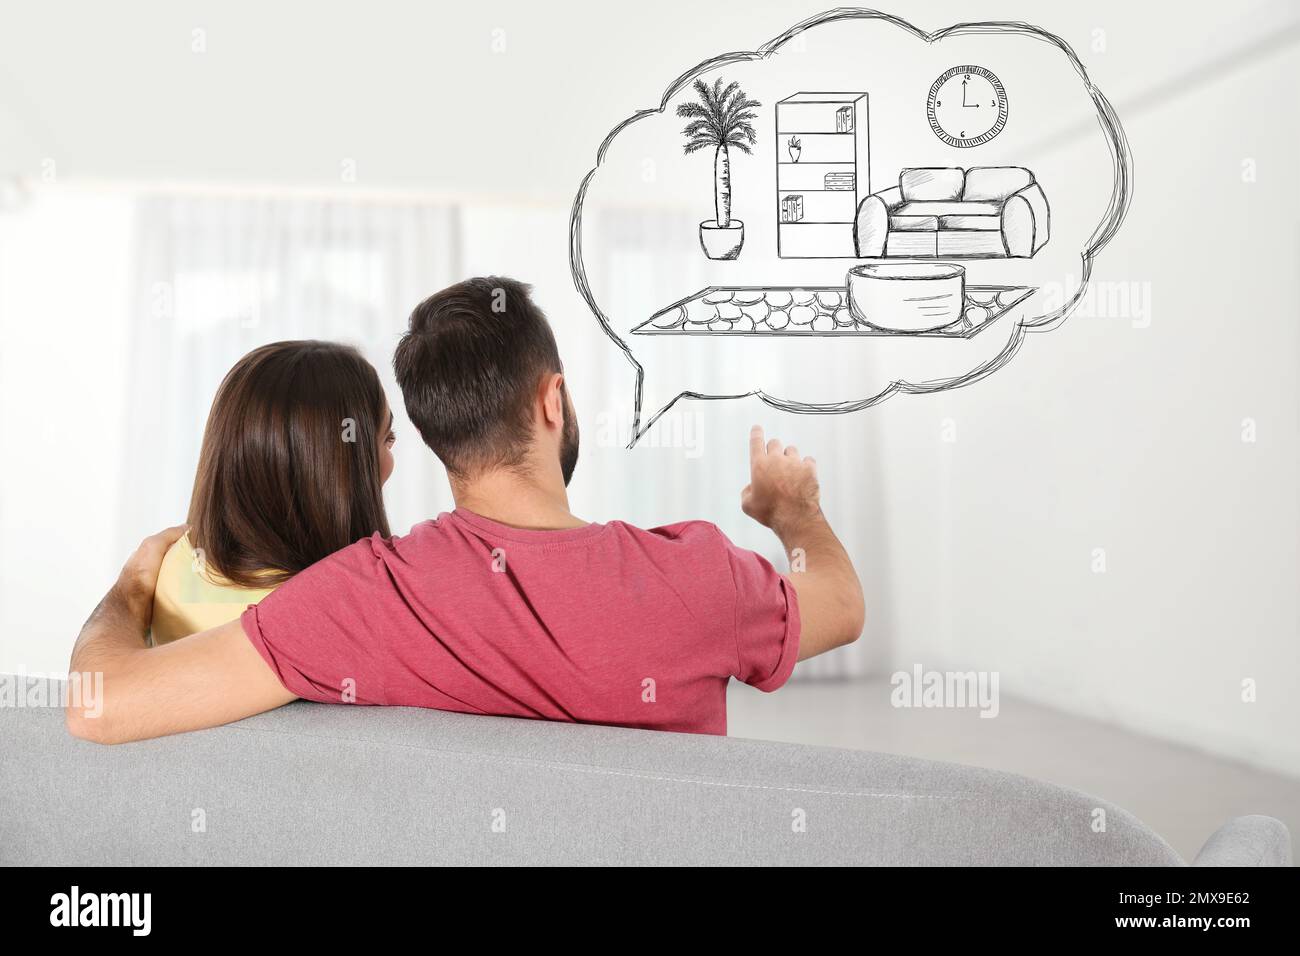 Moving to new house. Couple imagining living room arrangement. Illustrated interior design in speech bubble Stock Photo